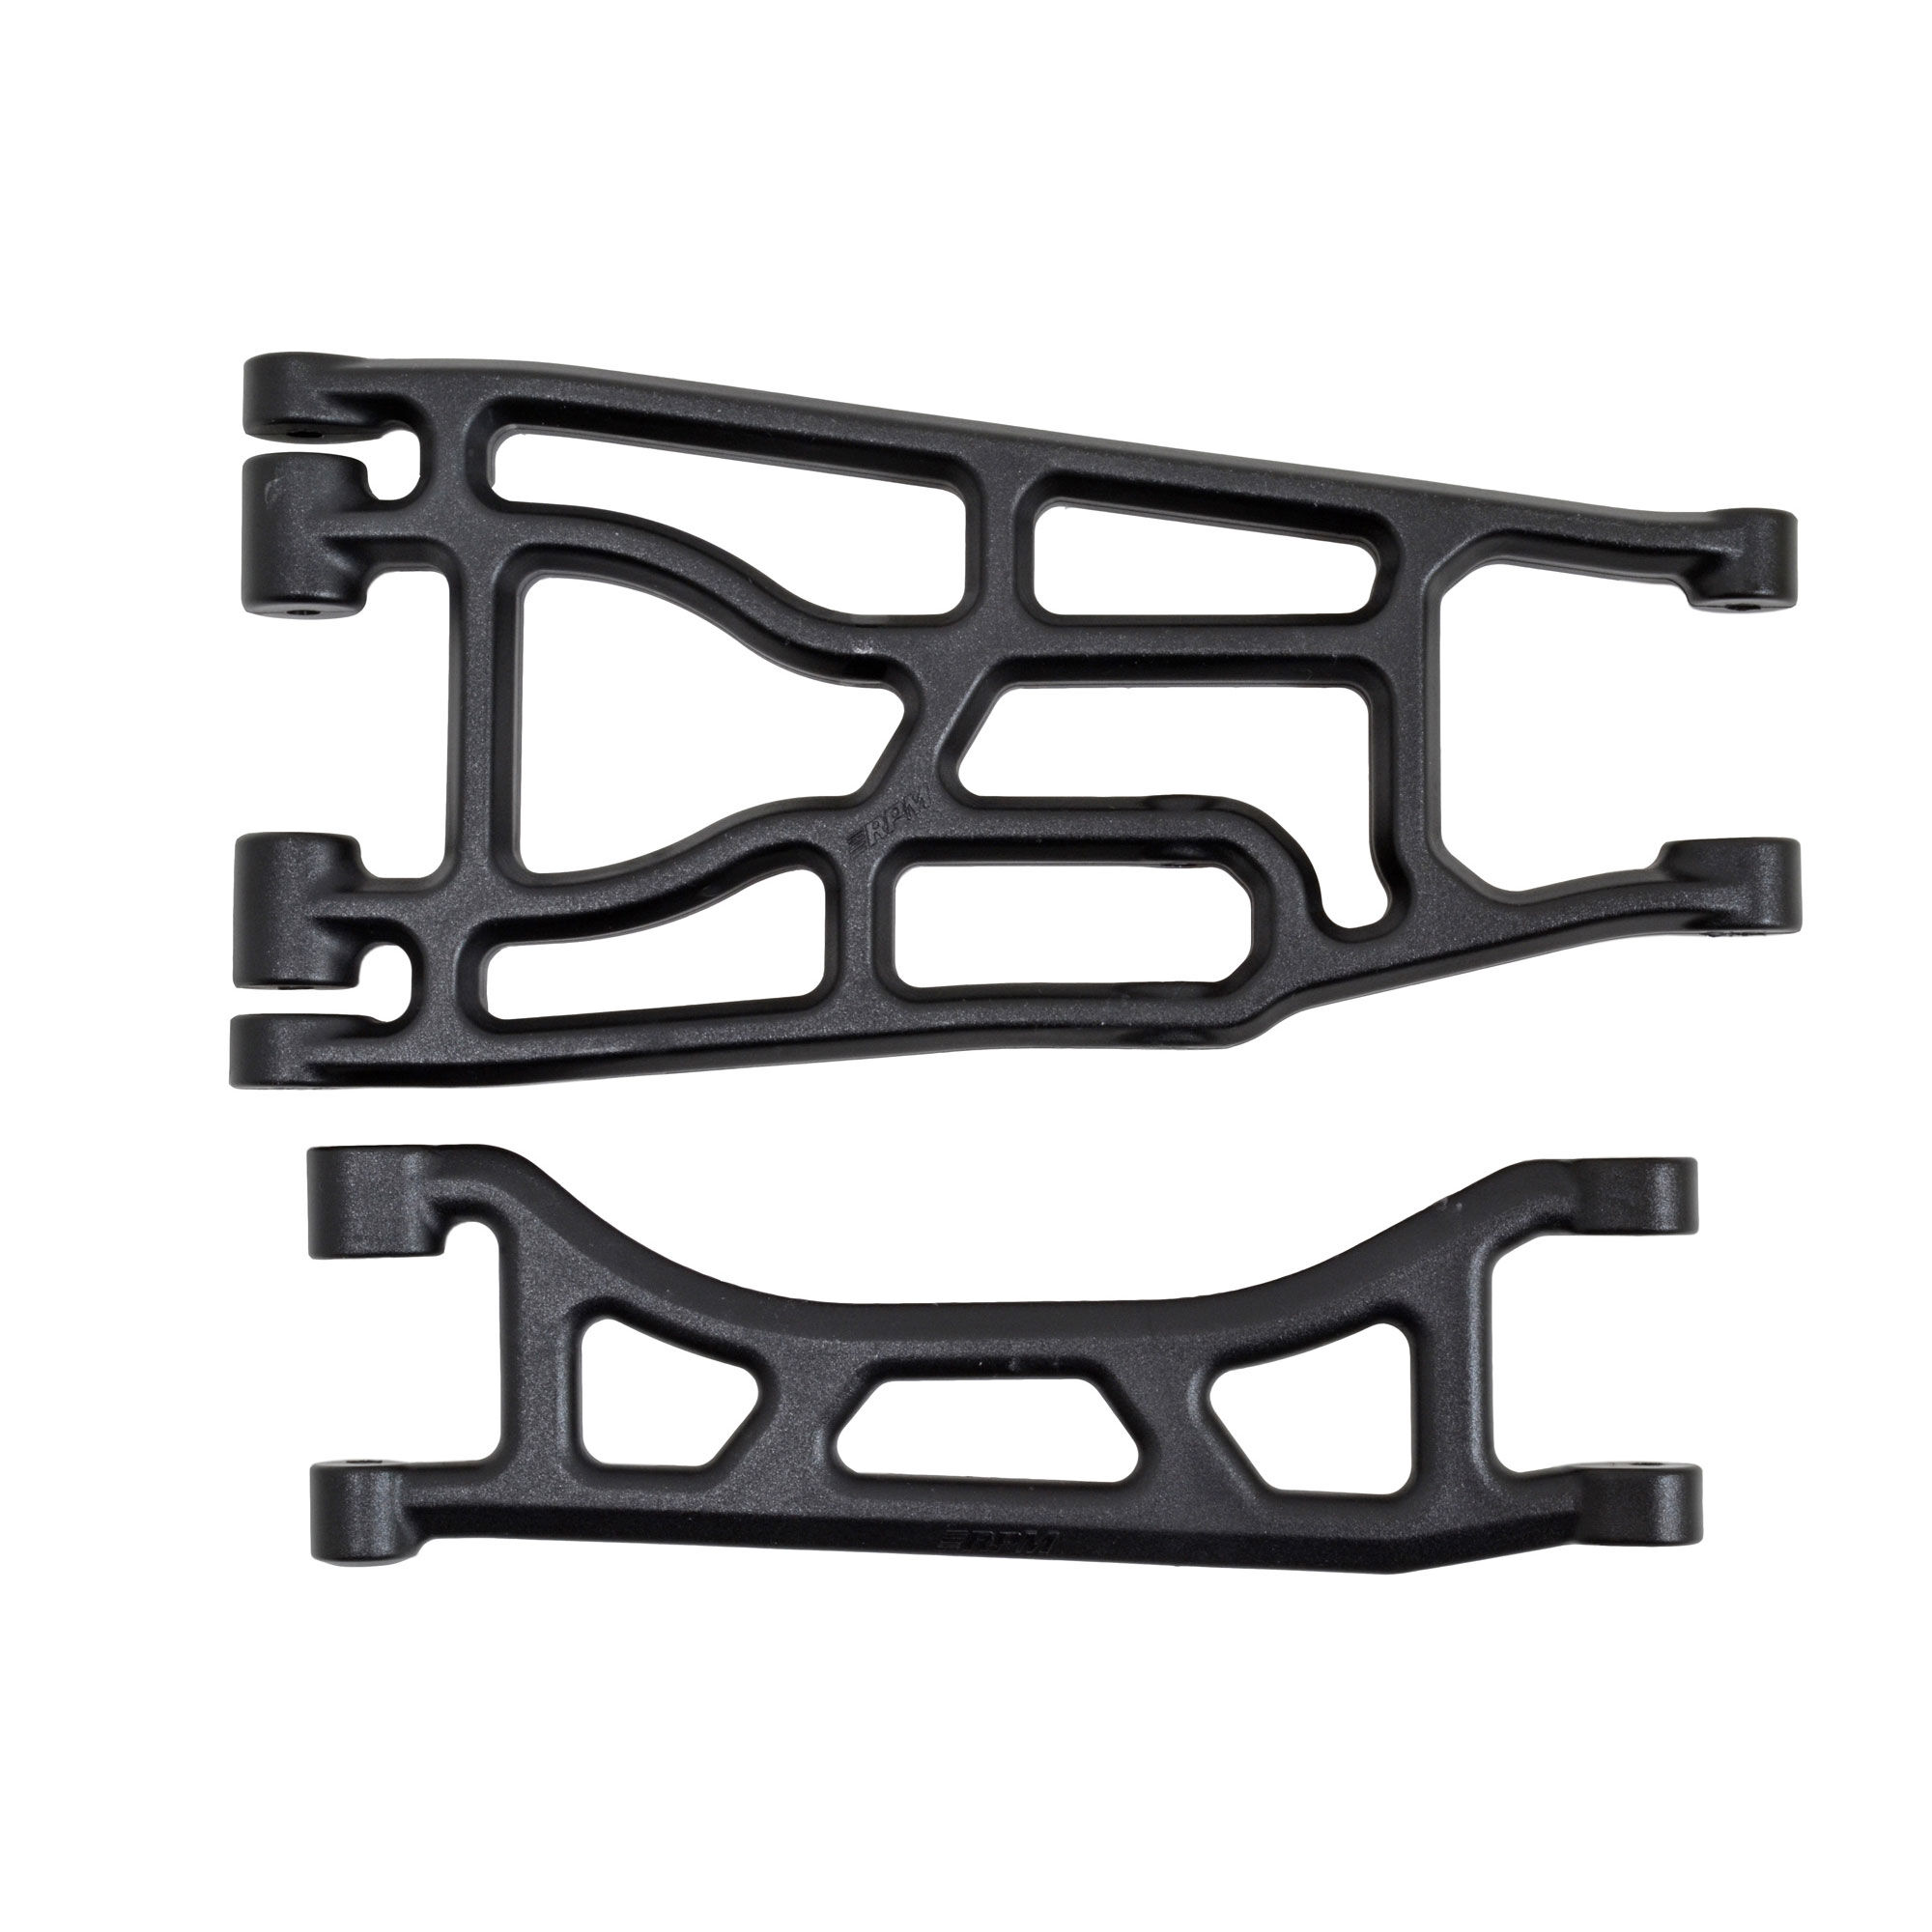 Grey fits the Traxxas X-Maxx Atomik RC Alloy Front/Rear Upper Arm Replaces Traxxas Part 7729